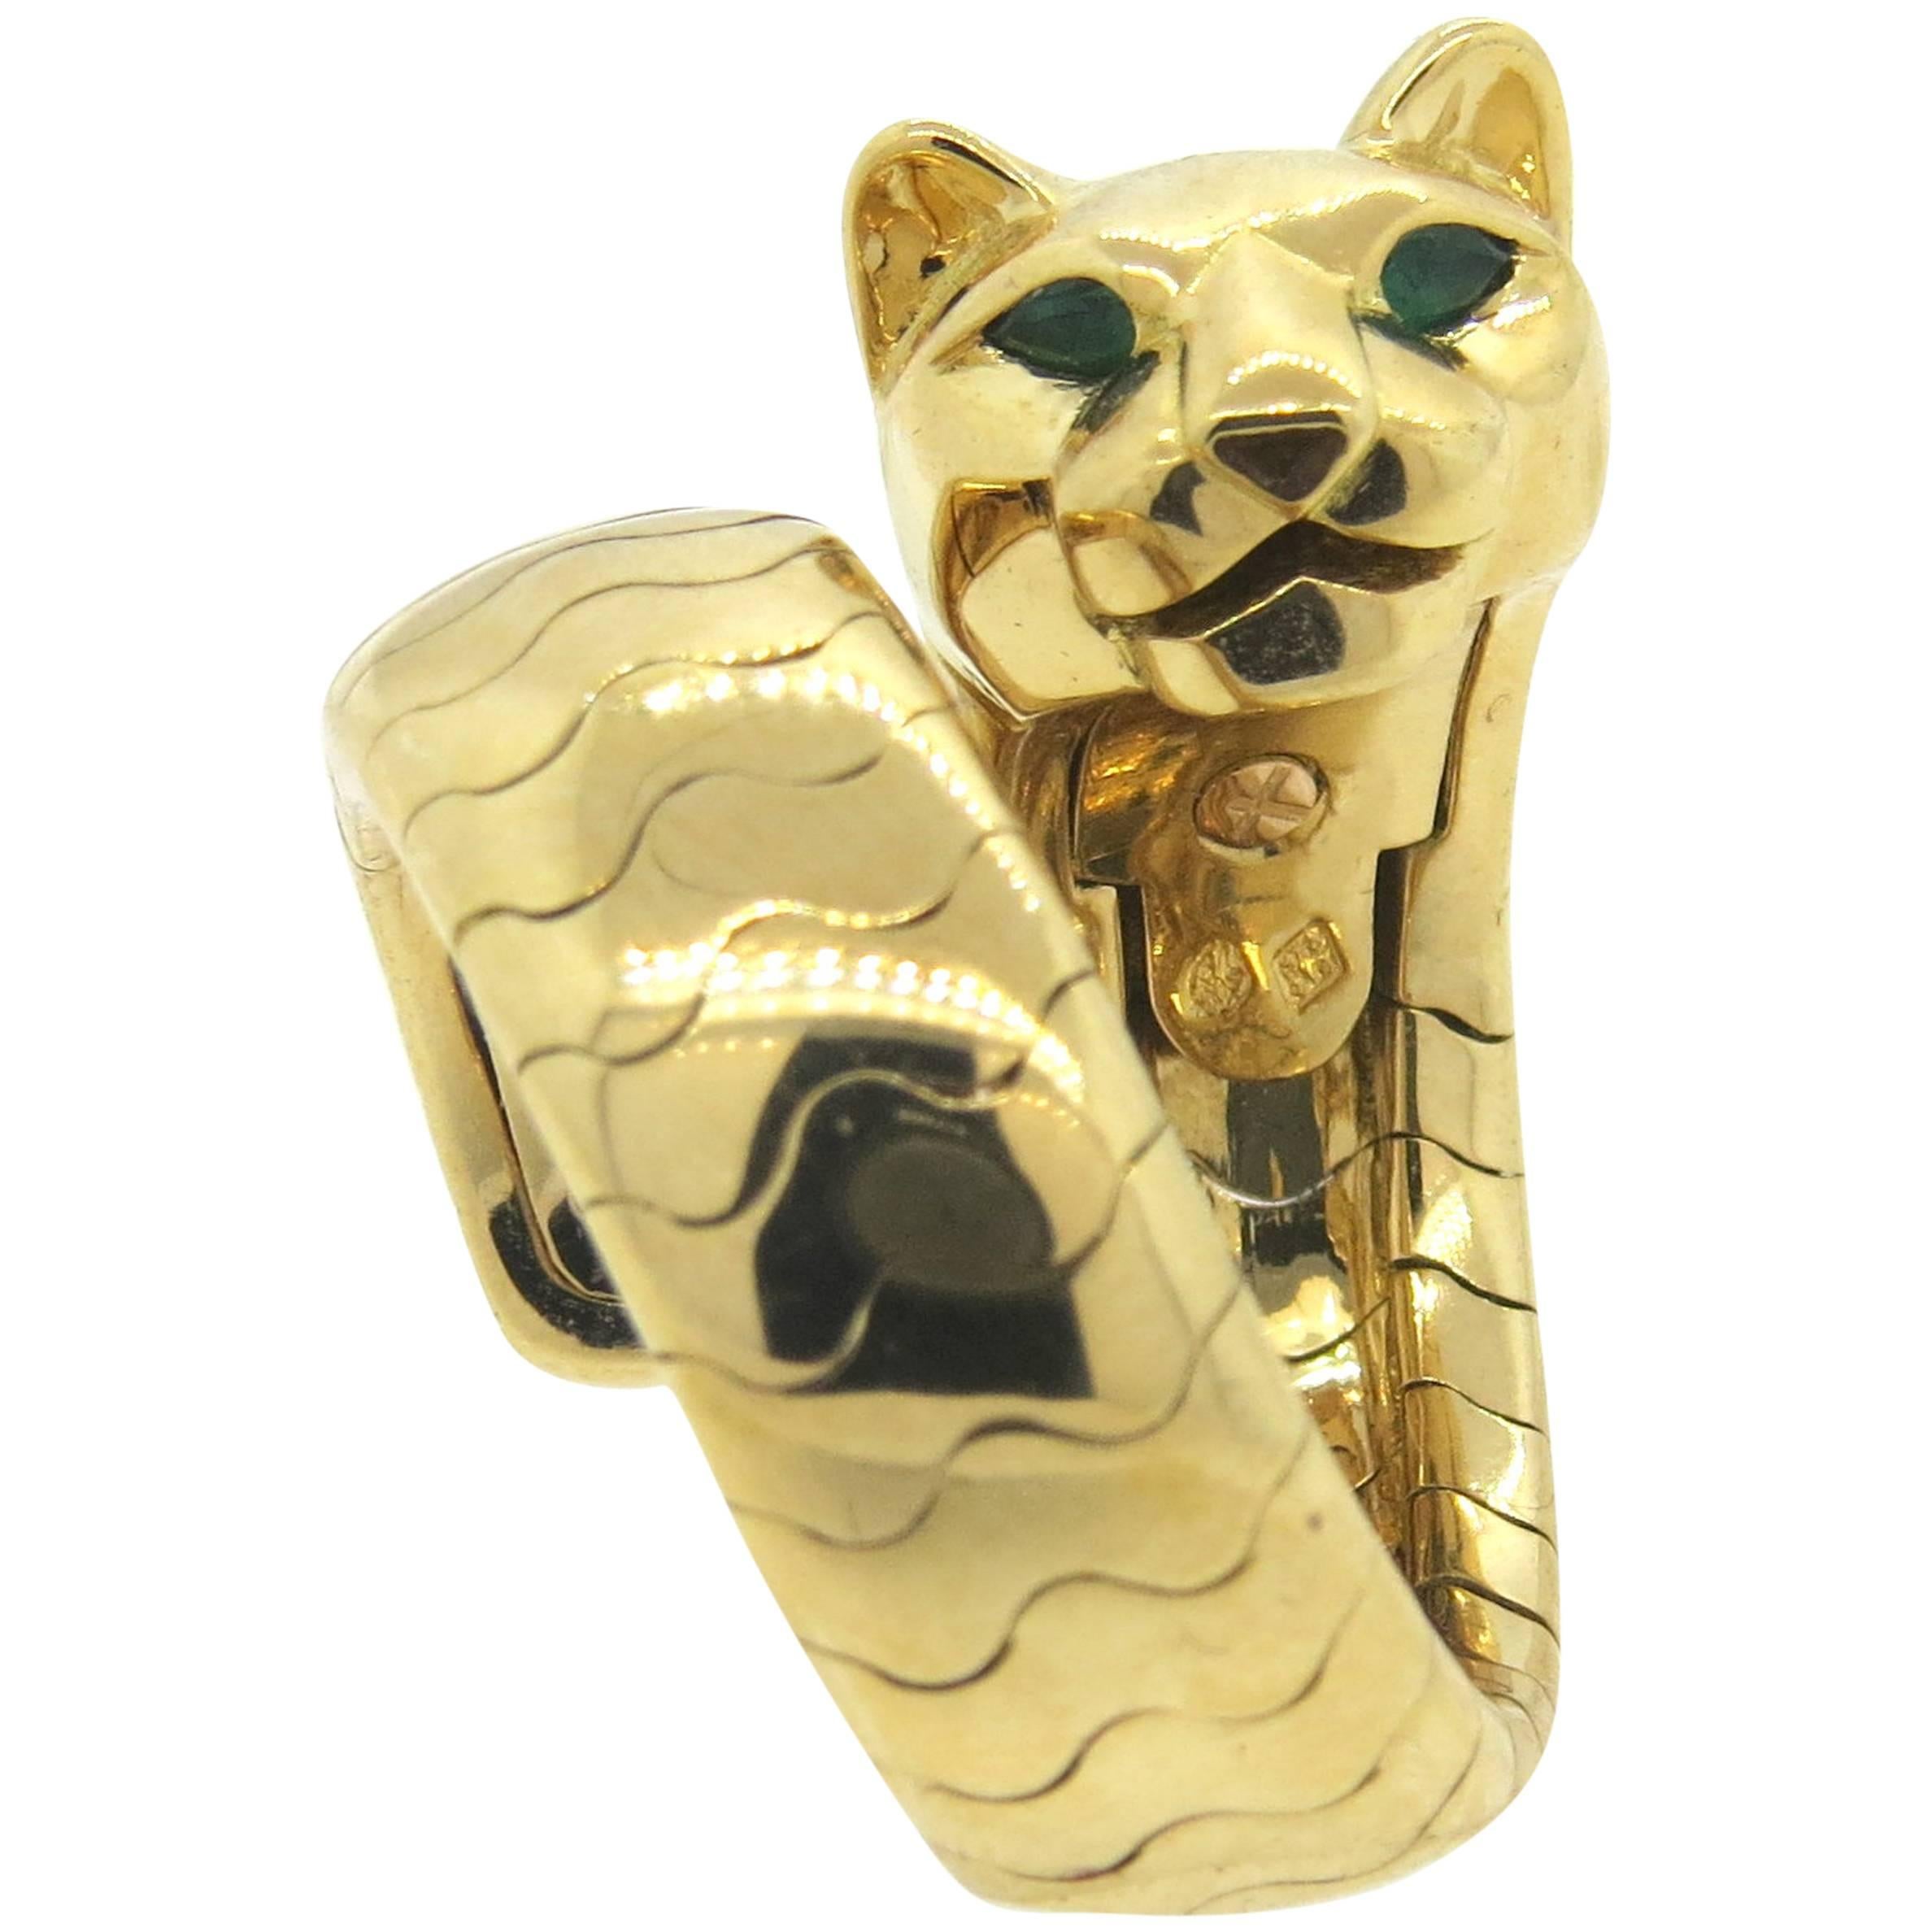 Cartier Panthere Onyx Emerald Gold Ring